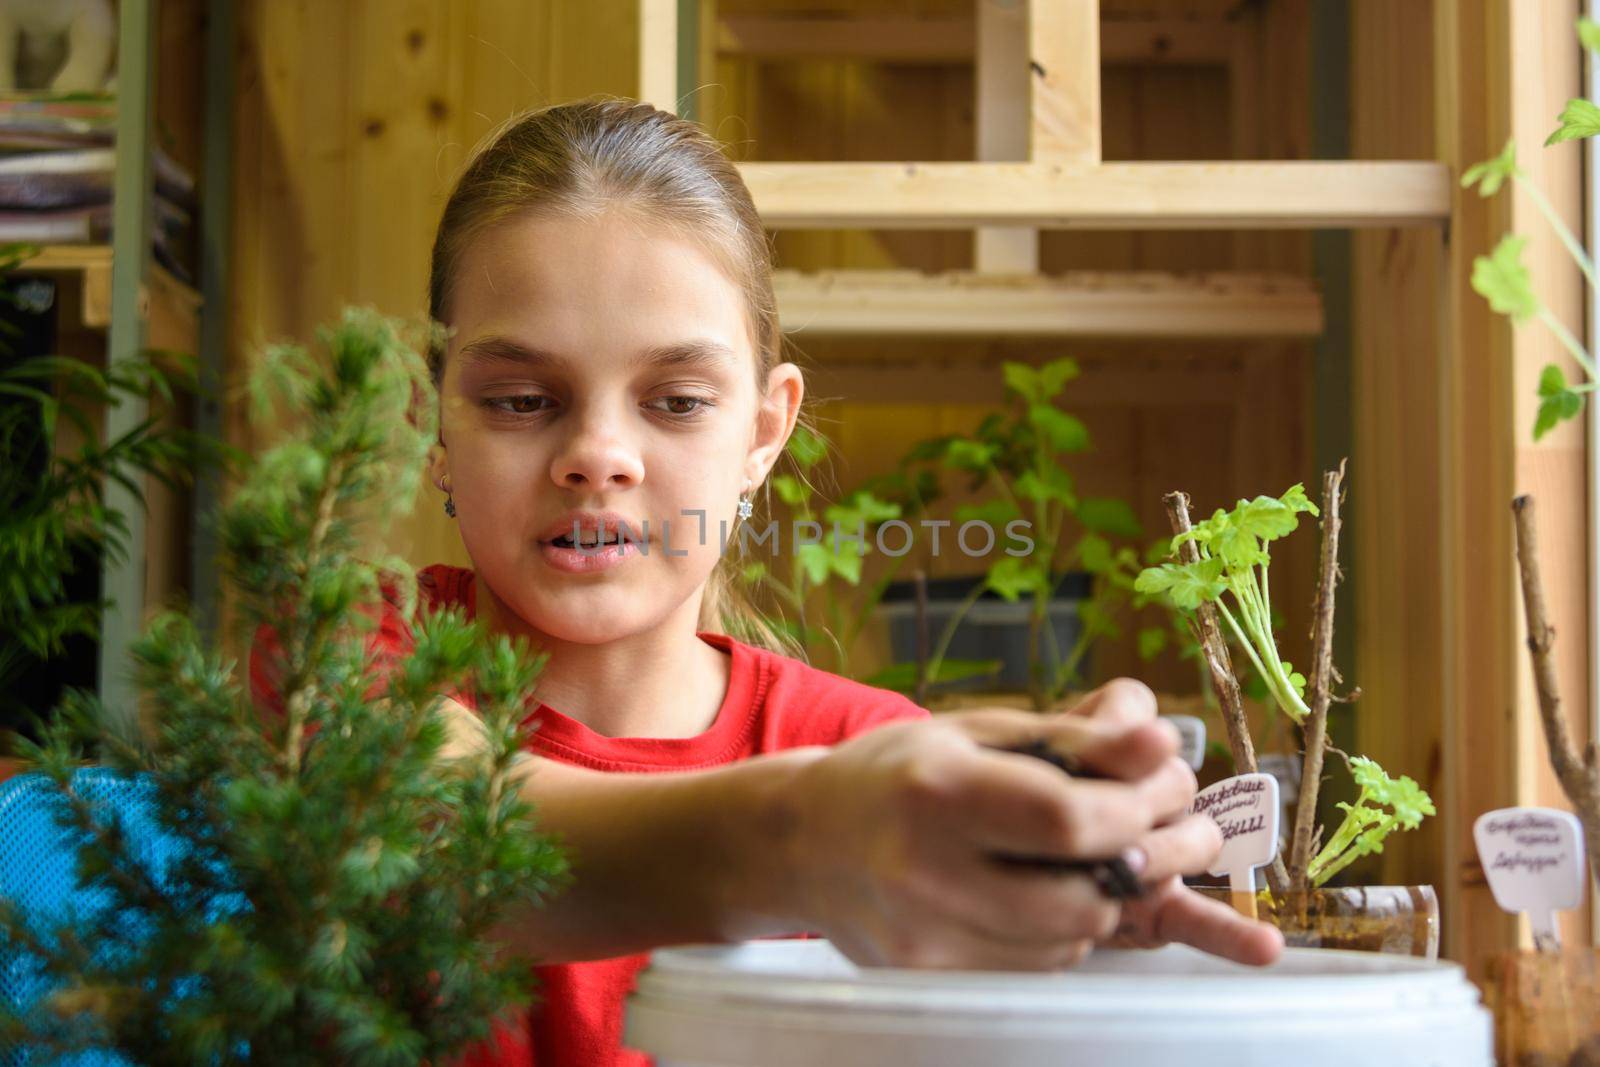 The girl takes the soil from the bucket for planting plants, close-up by Madhourse